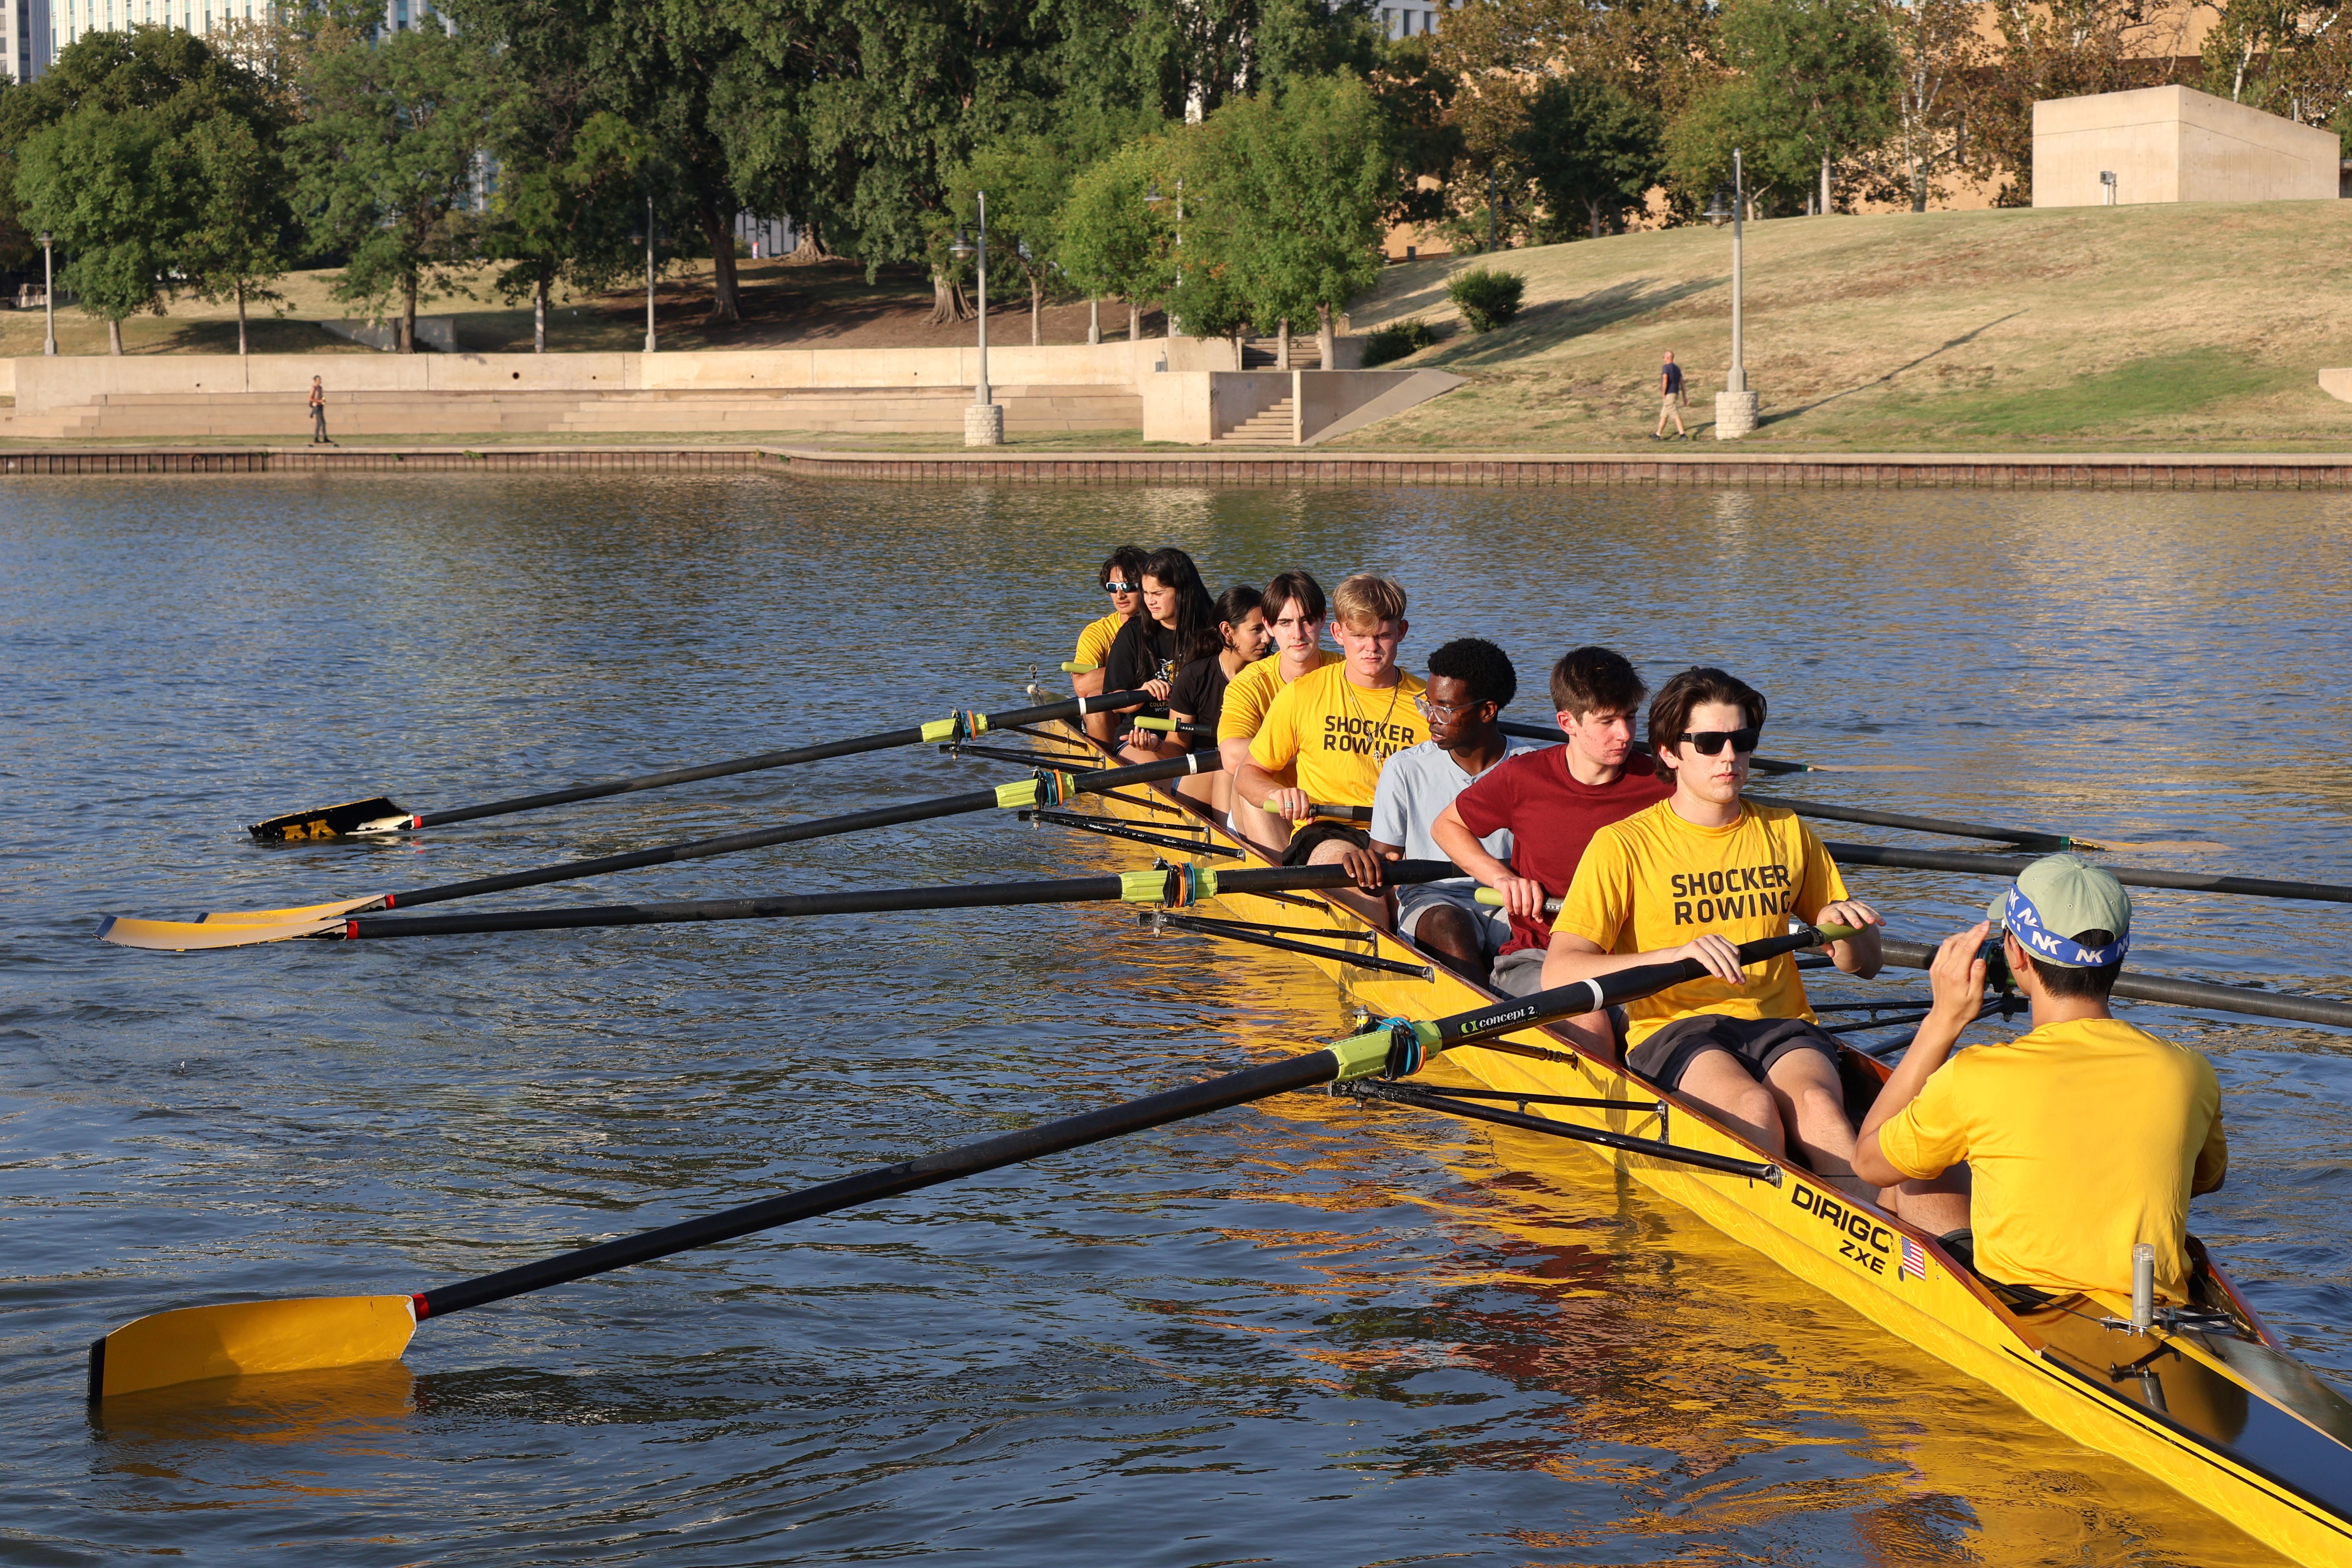 Shocker Rowing at the event